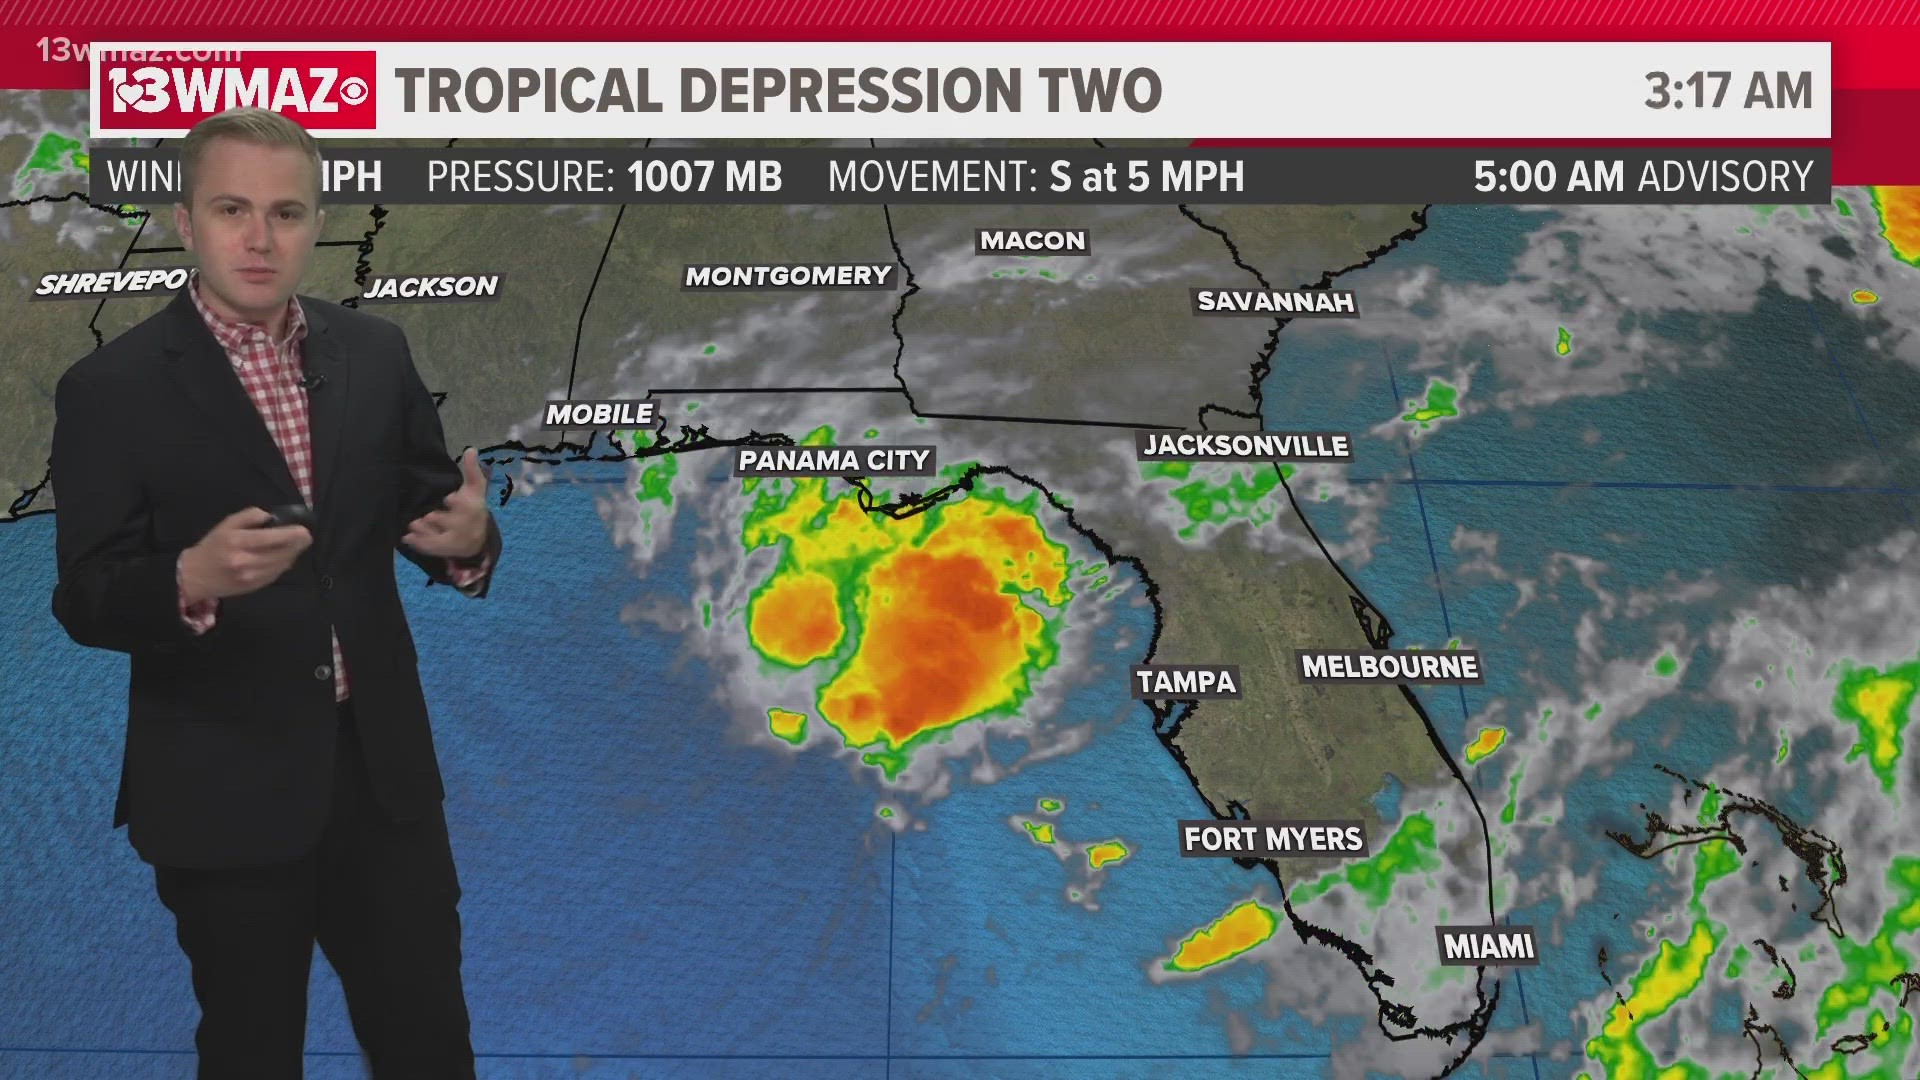 Tropical Depression Two is expected to only bring showers to Cuba.